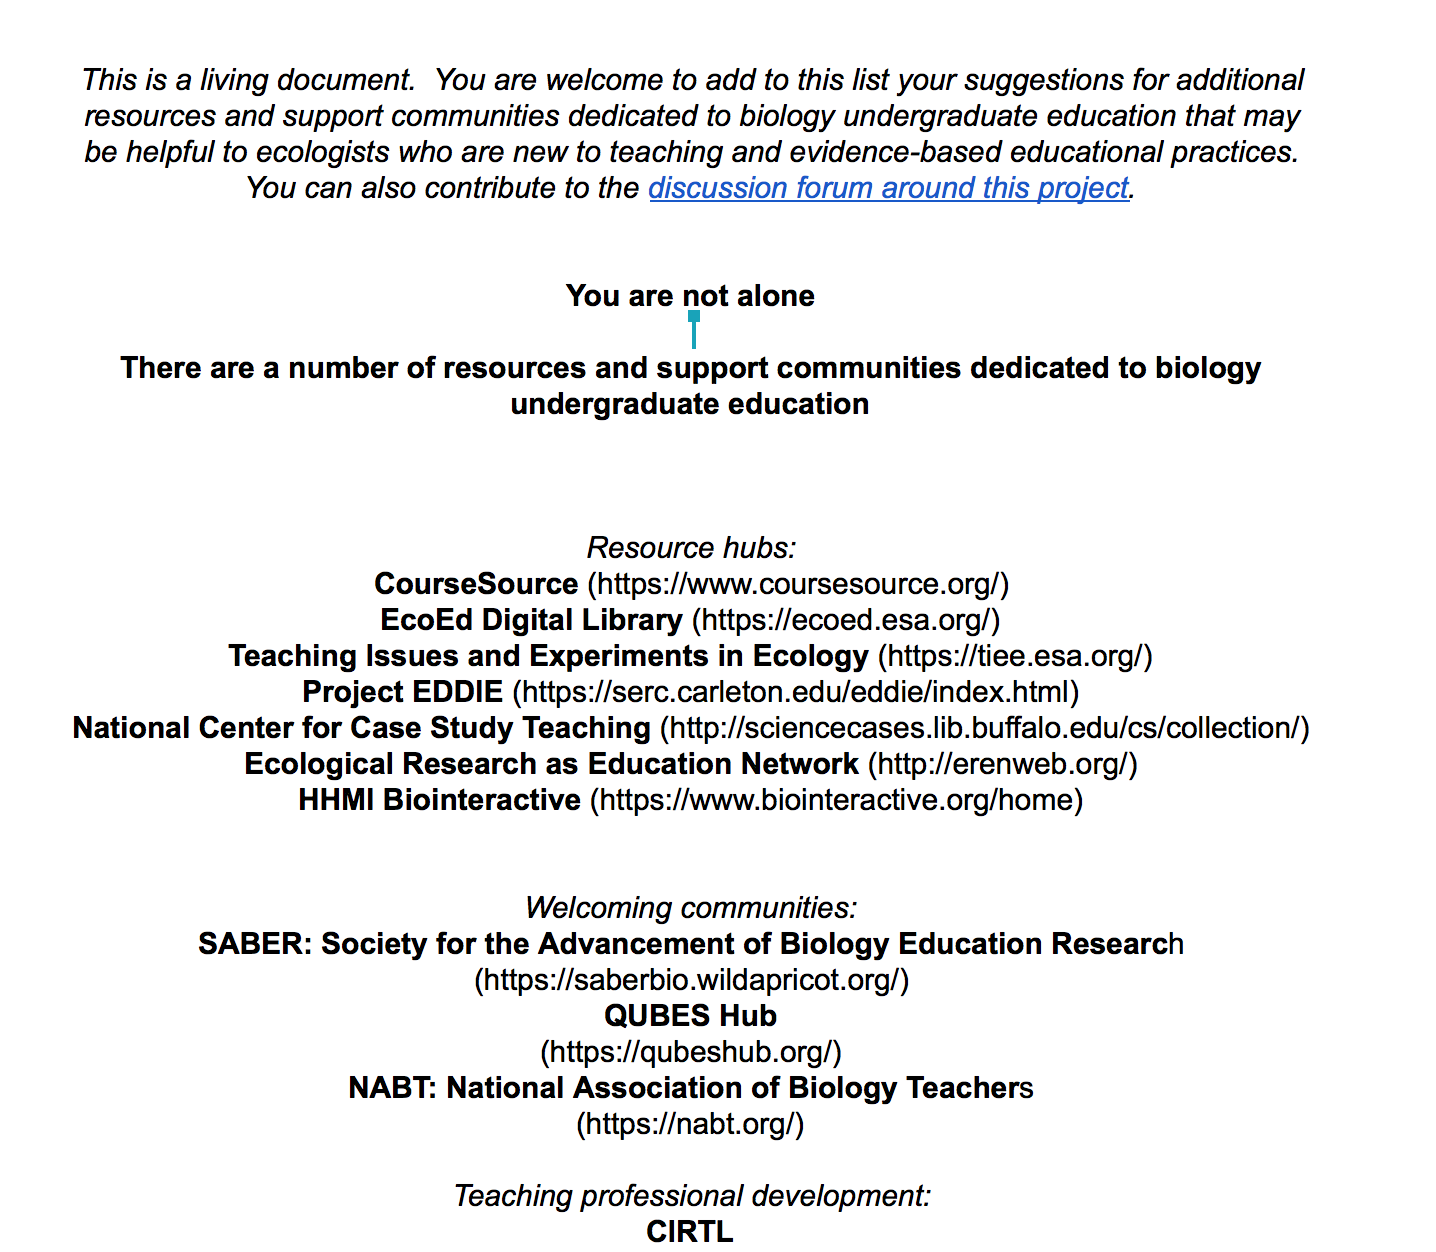 List of resources and support communities dedicated to biology undergraduate education